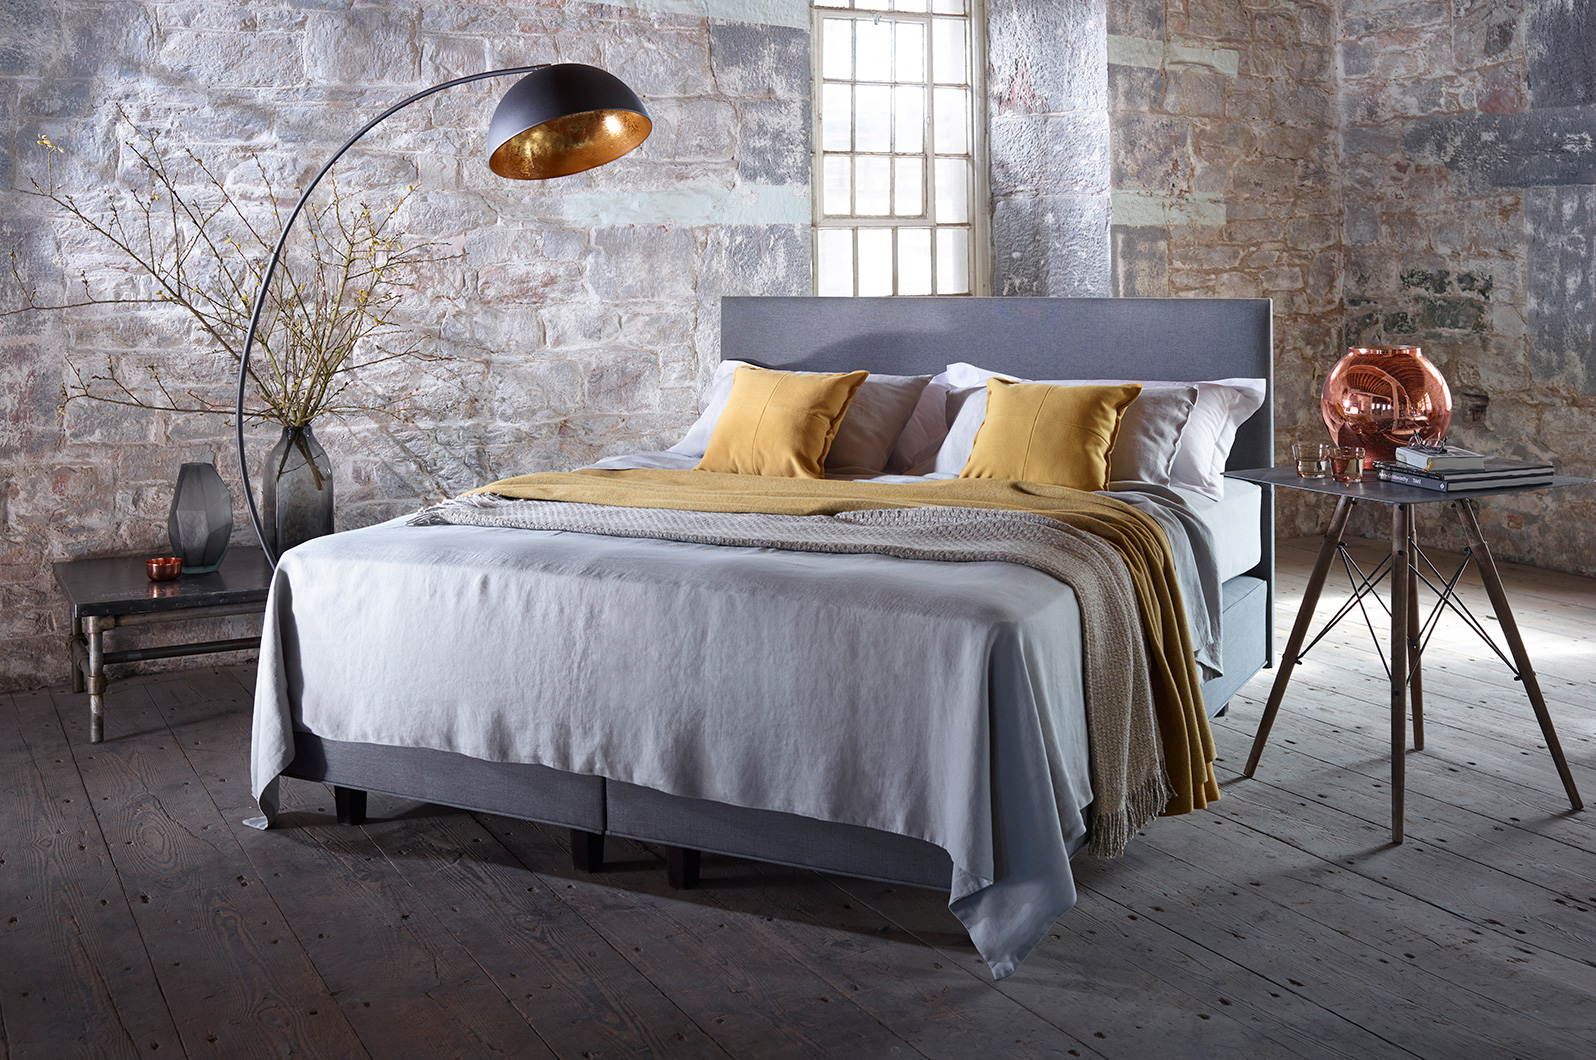 Vispring shoot for Limited Edition Britannica bed, marketed in Europe.